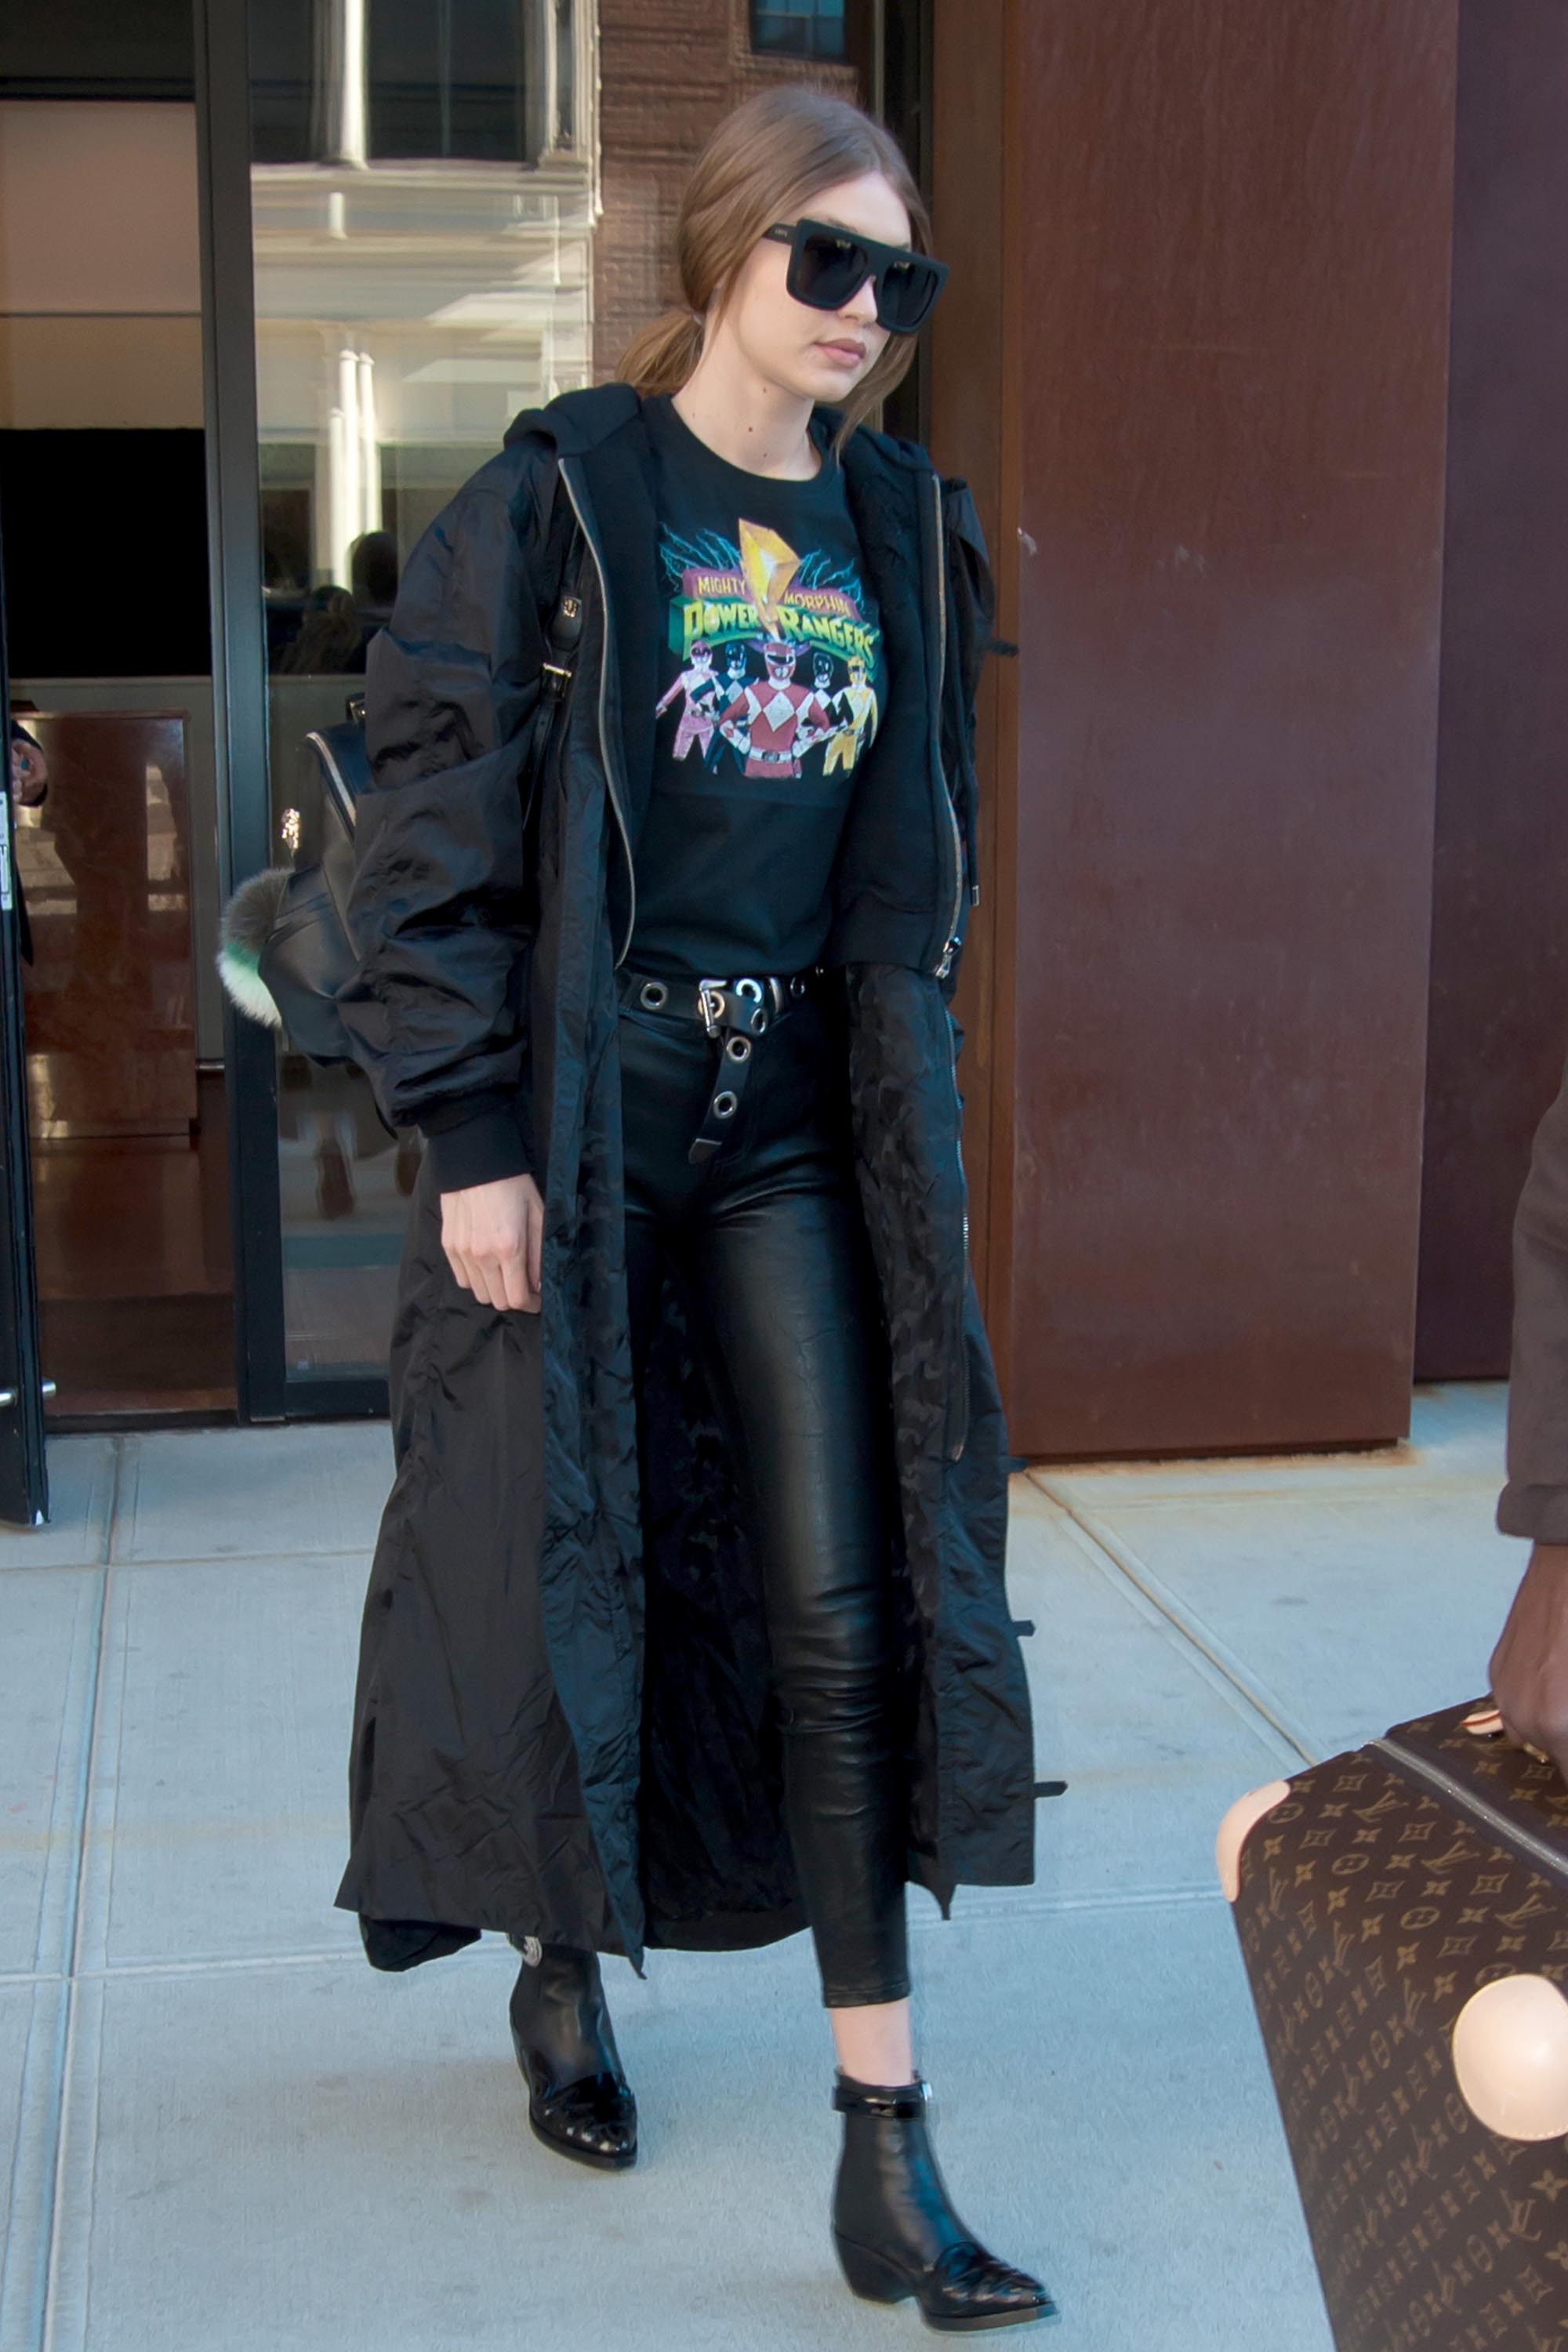 Gigi Hadid leaving her apartment in NYC